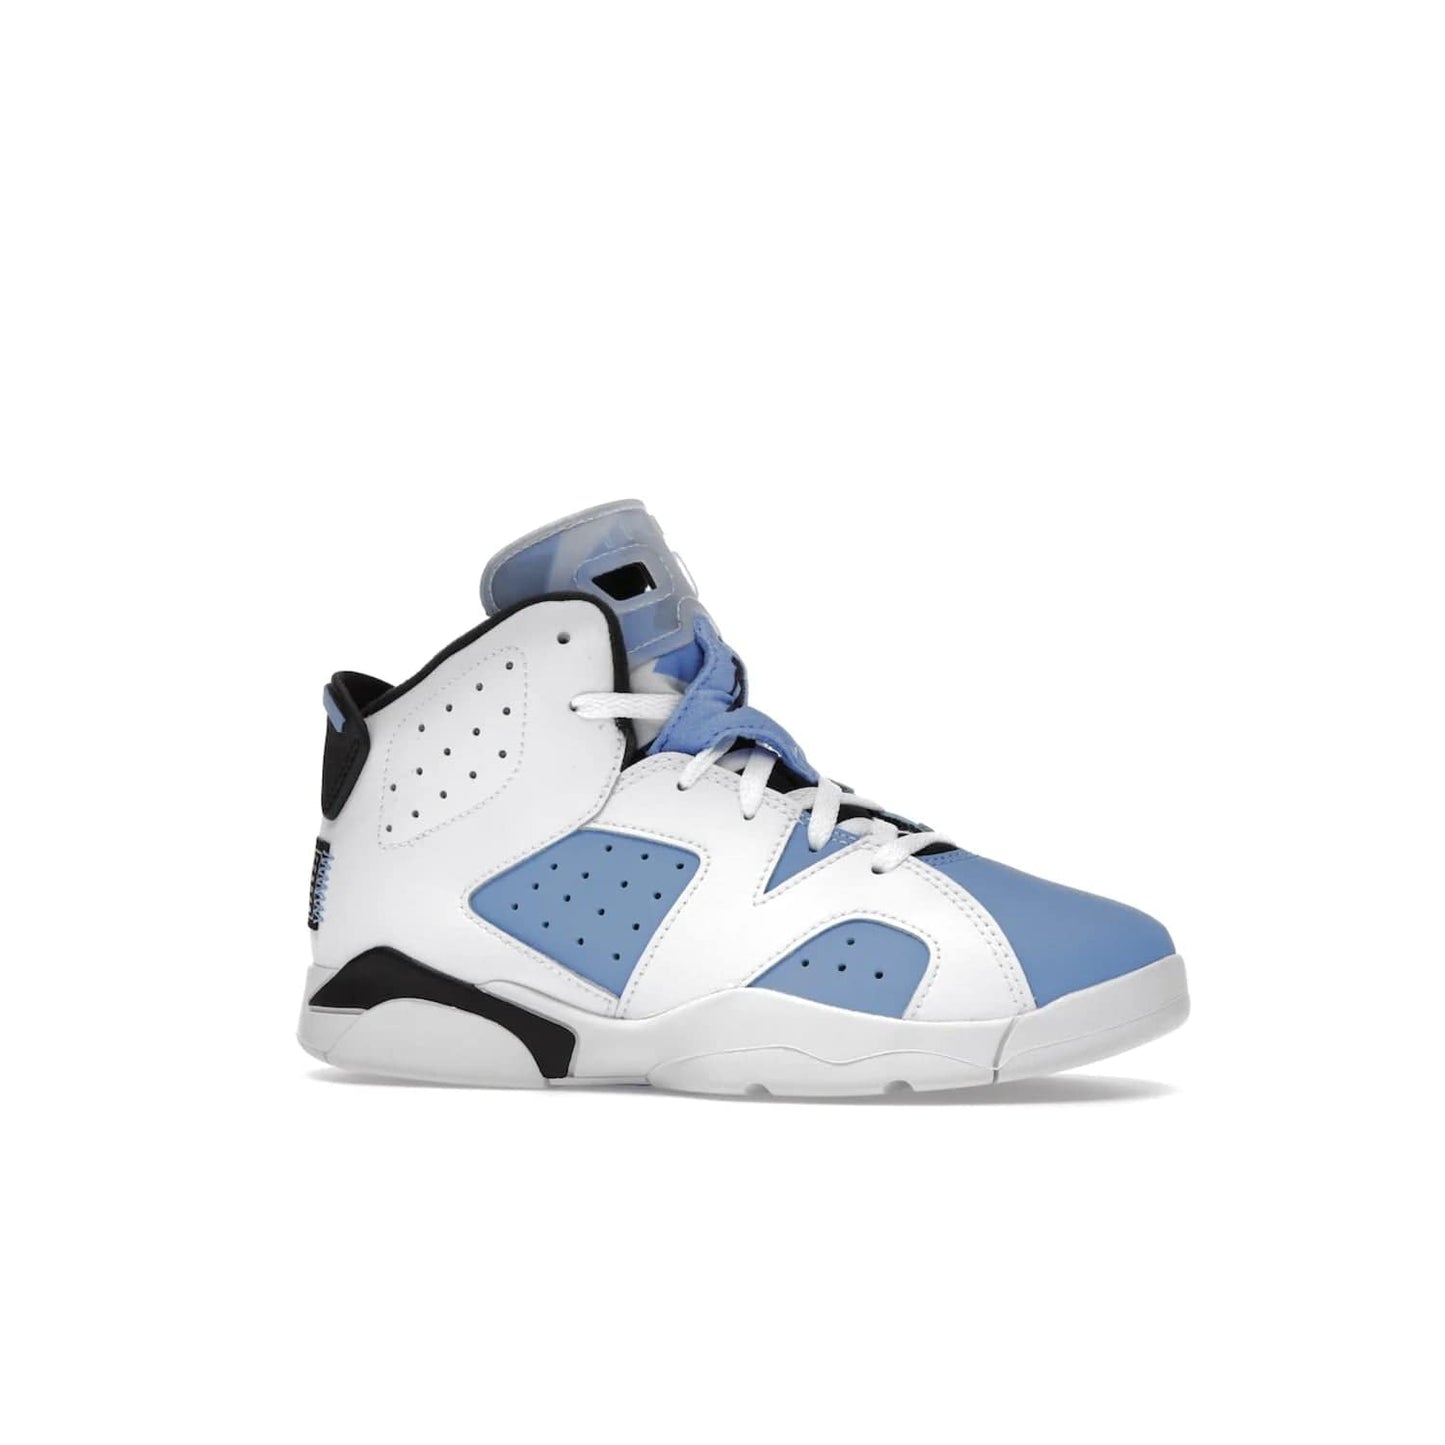 Jordan 6 Retro UNC White (PS) - Image 3 - Only at www.BallersClubKickz.com - The Air Jordan 6 Retro UNC White PS celebrates Michael Jordan's alma mater, the University of North Carolina. It features a classic color-blocking of the iconic Jordan 6 Carmine and a stitched Jordan Team patch. This must-have sneaker released on April 27th, 2022. Referencing the university colors, get this shoe for a stylish and timeless style with university pride.